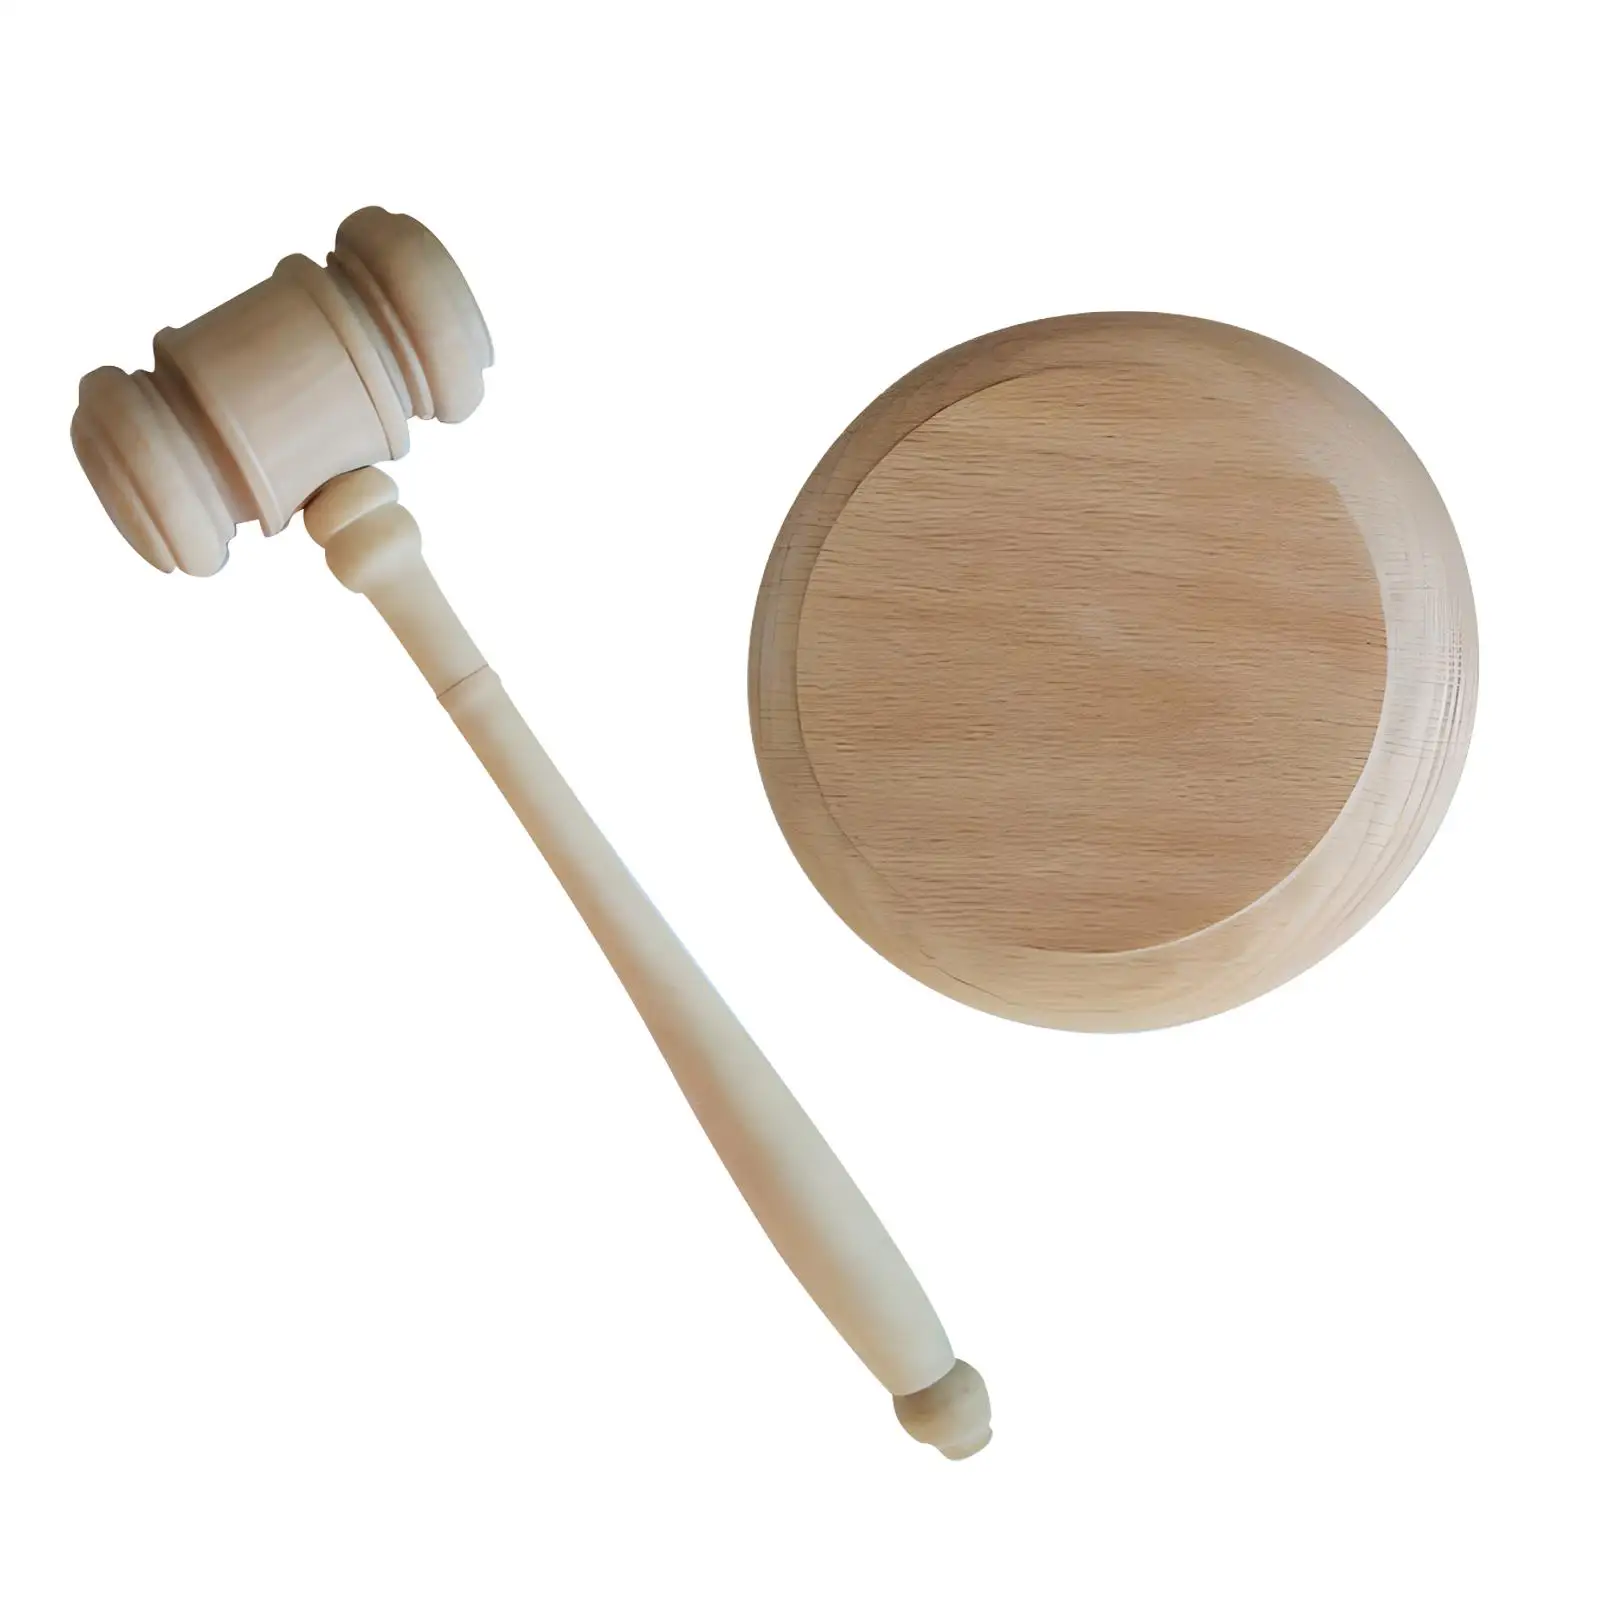 Wooden Gavel and Block Set 21cm Mallet Handmade Judge Gavels Hand Hammer Auction Mallet Toy for Meeting Courtroom Students Judge